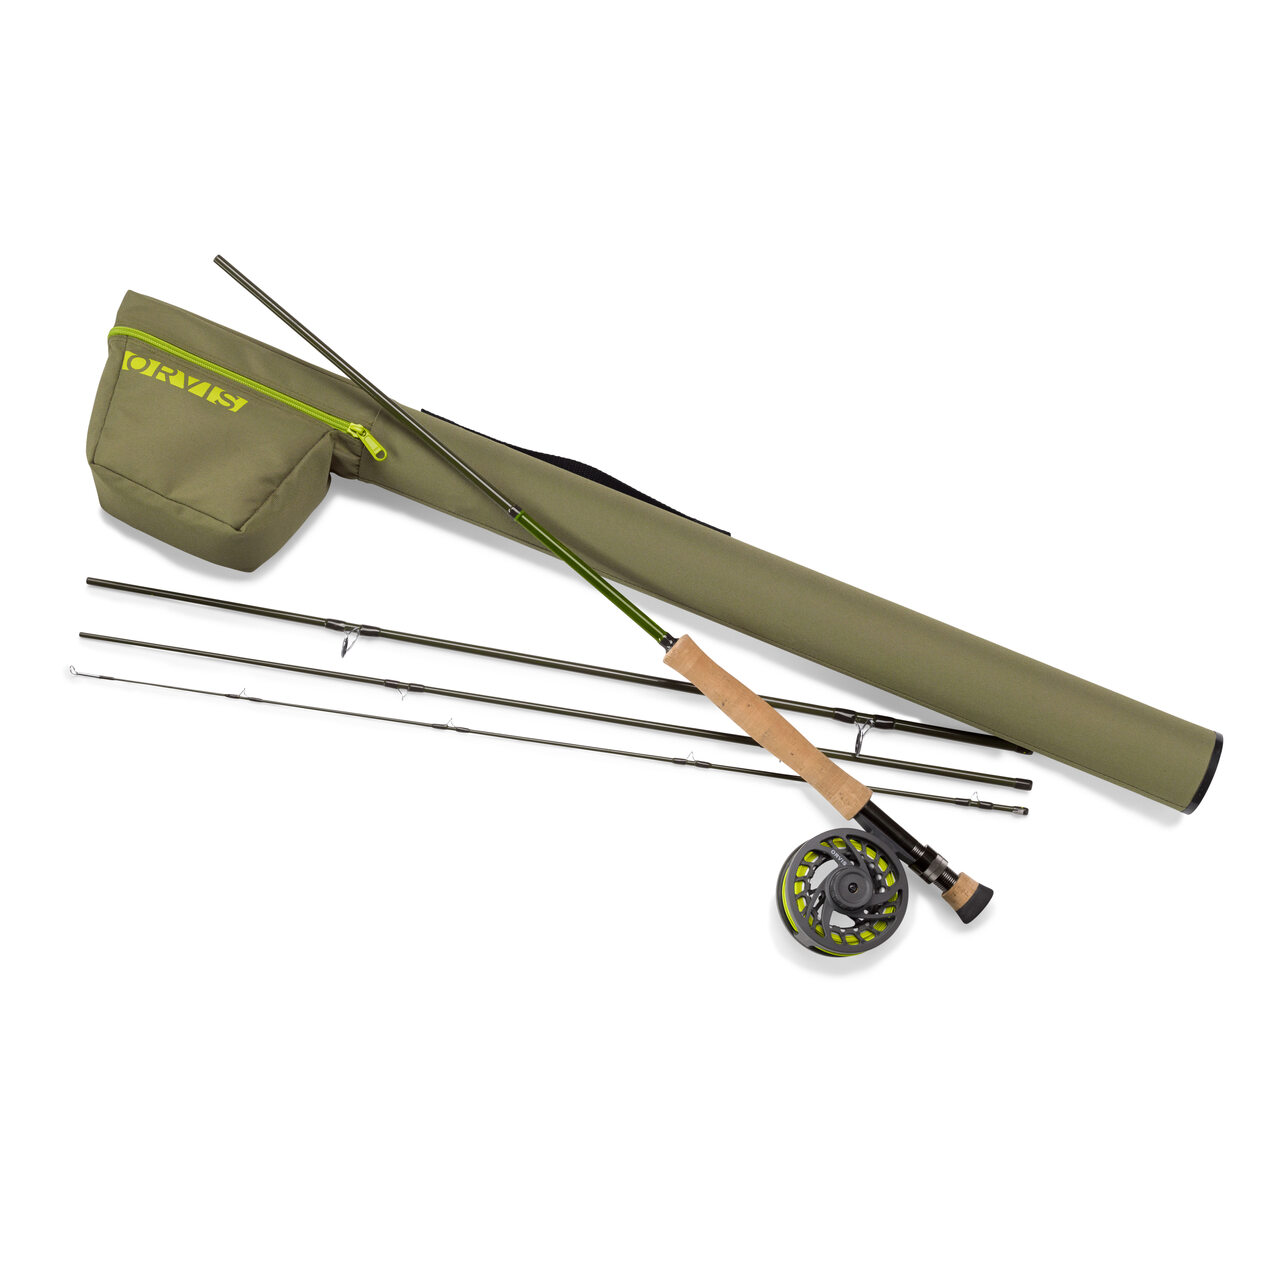 Field Kit Combo Home, 56% OFF